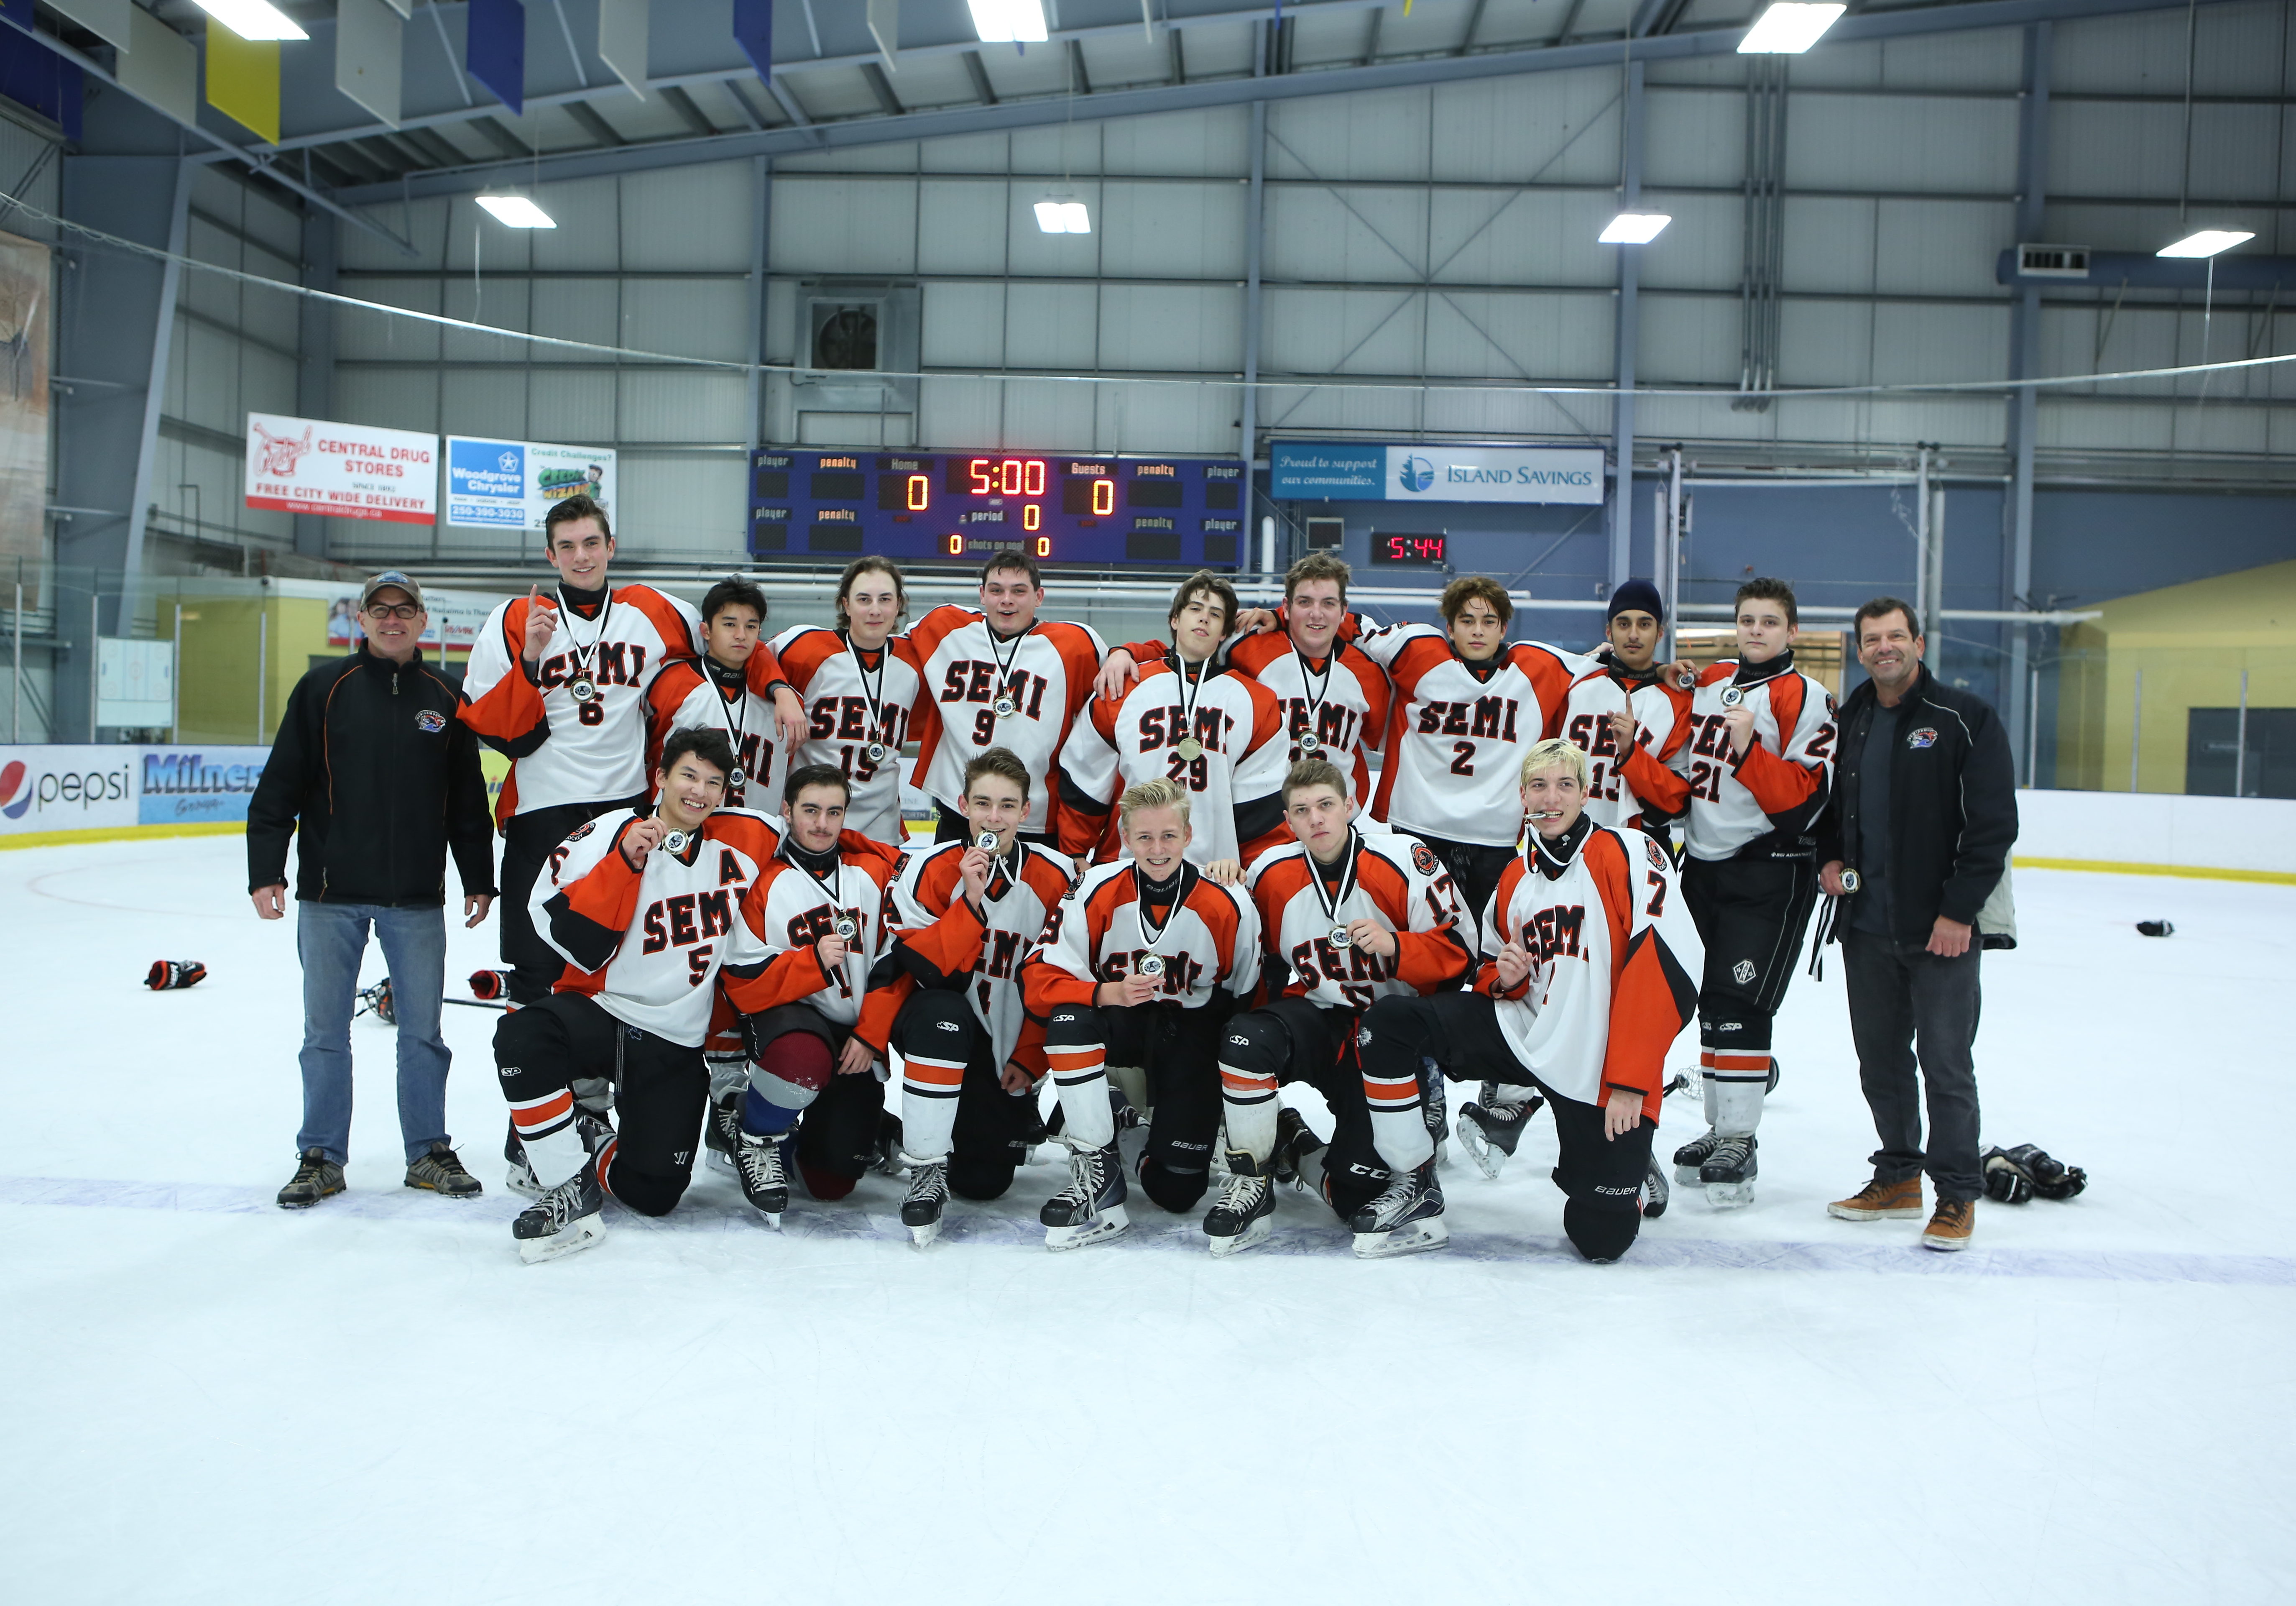 Oct 8, 2017 ~ SEMI's Midget C4 team wins GOLD at the Thanksgiving Tournament in Nanaimo this weekend.  Congrats Team!